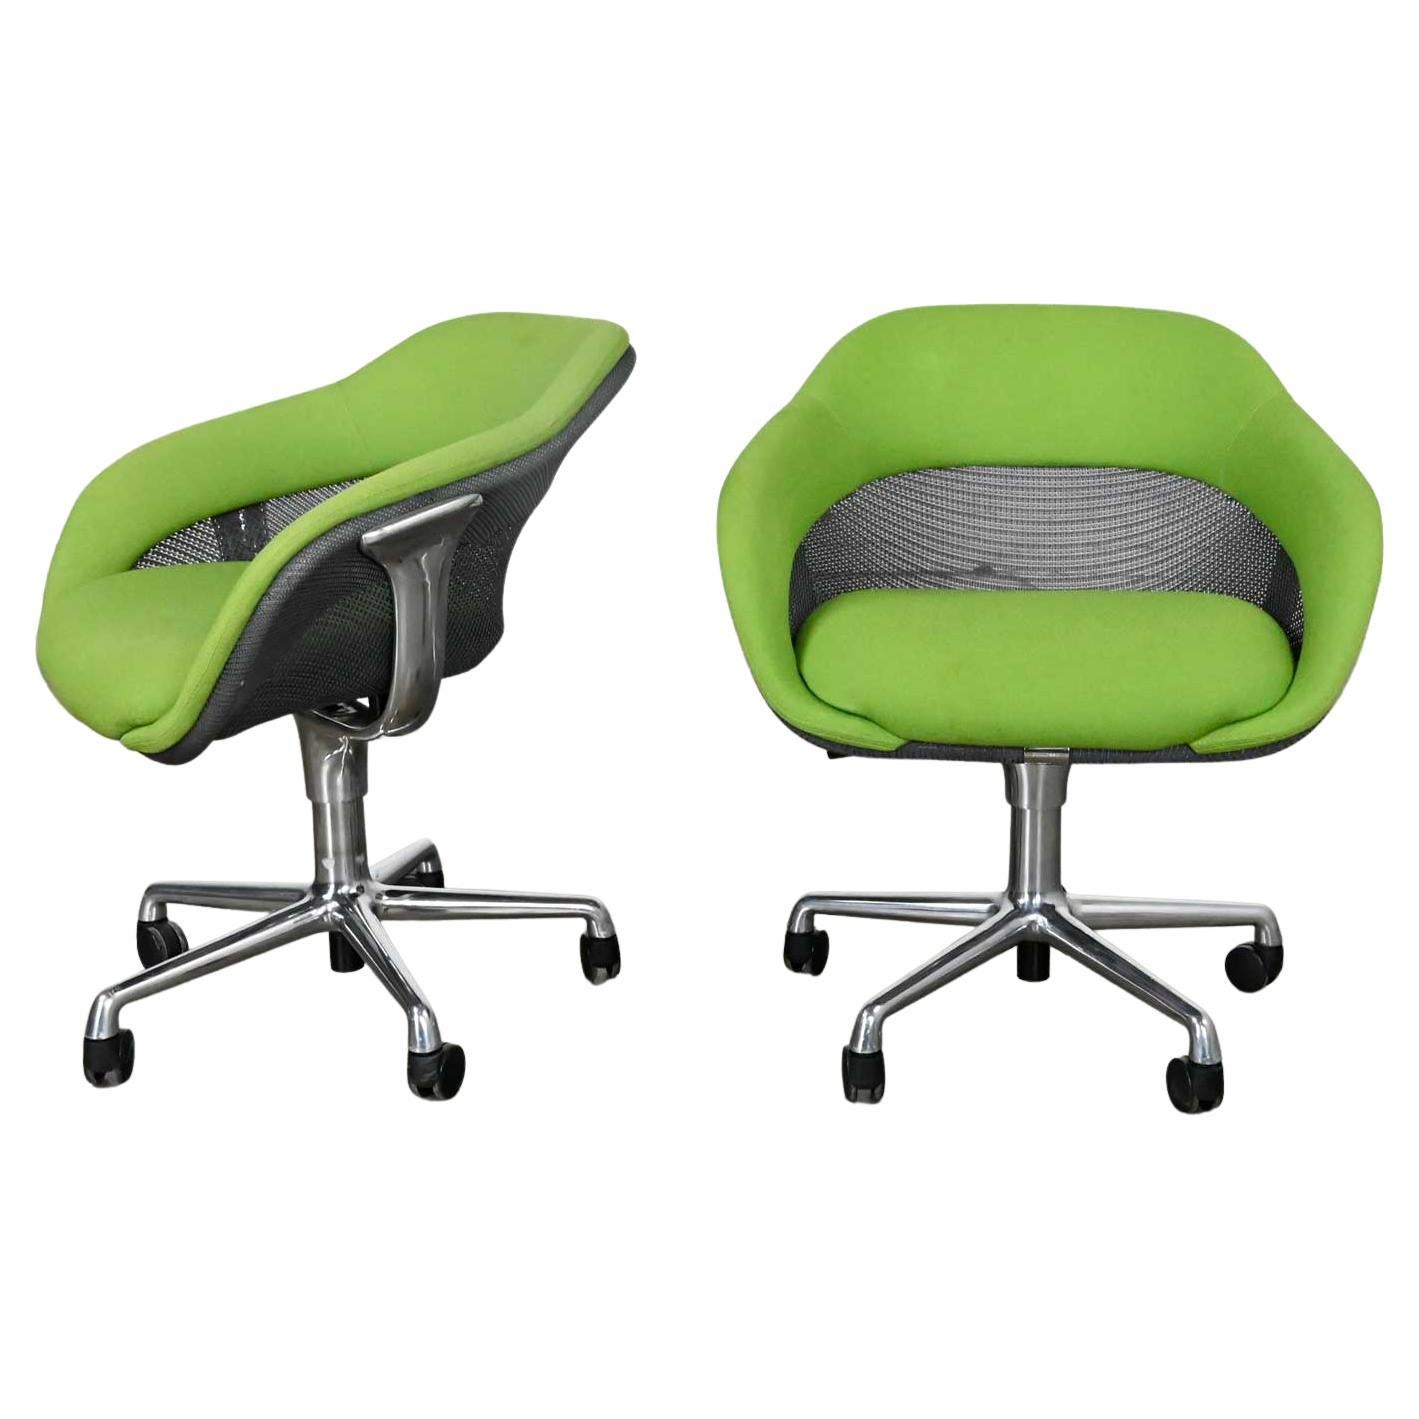 Modern Steelcase Green 5 Prong Chrome Rolling Base Coalesse Office Chairs a Pair